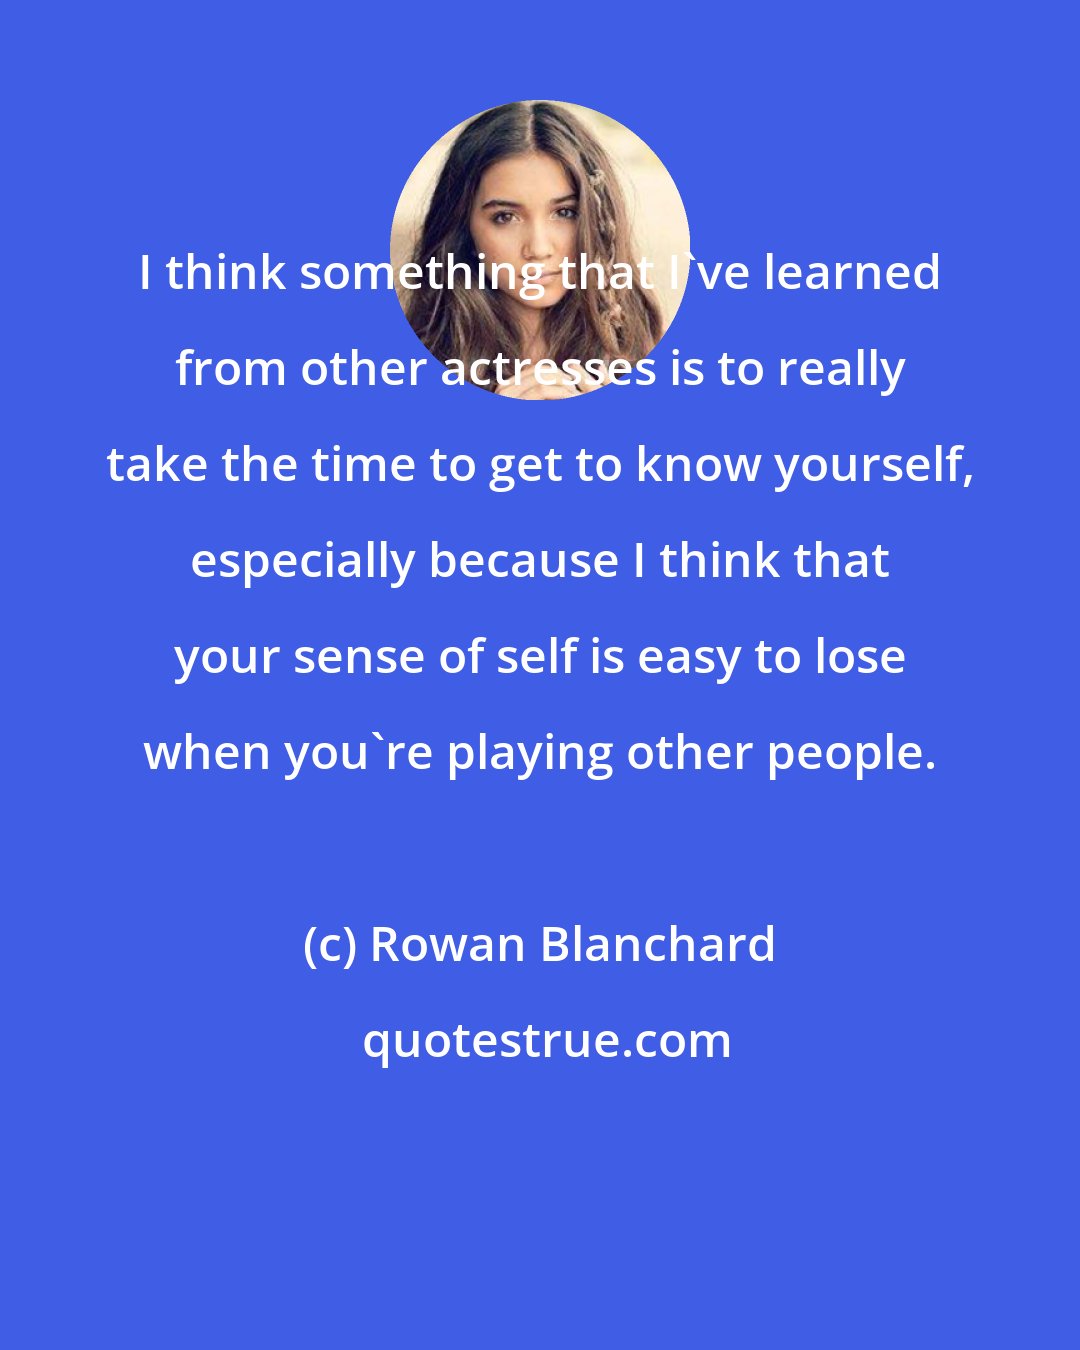 Rowan Blanchard: I think something that I've learned from other actresses is to really take the time to get to know yourself, especially because I think that your sense of self is easy to lose when you're playing other people.